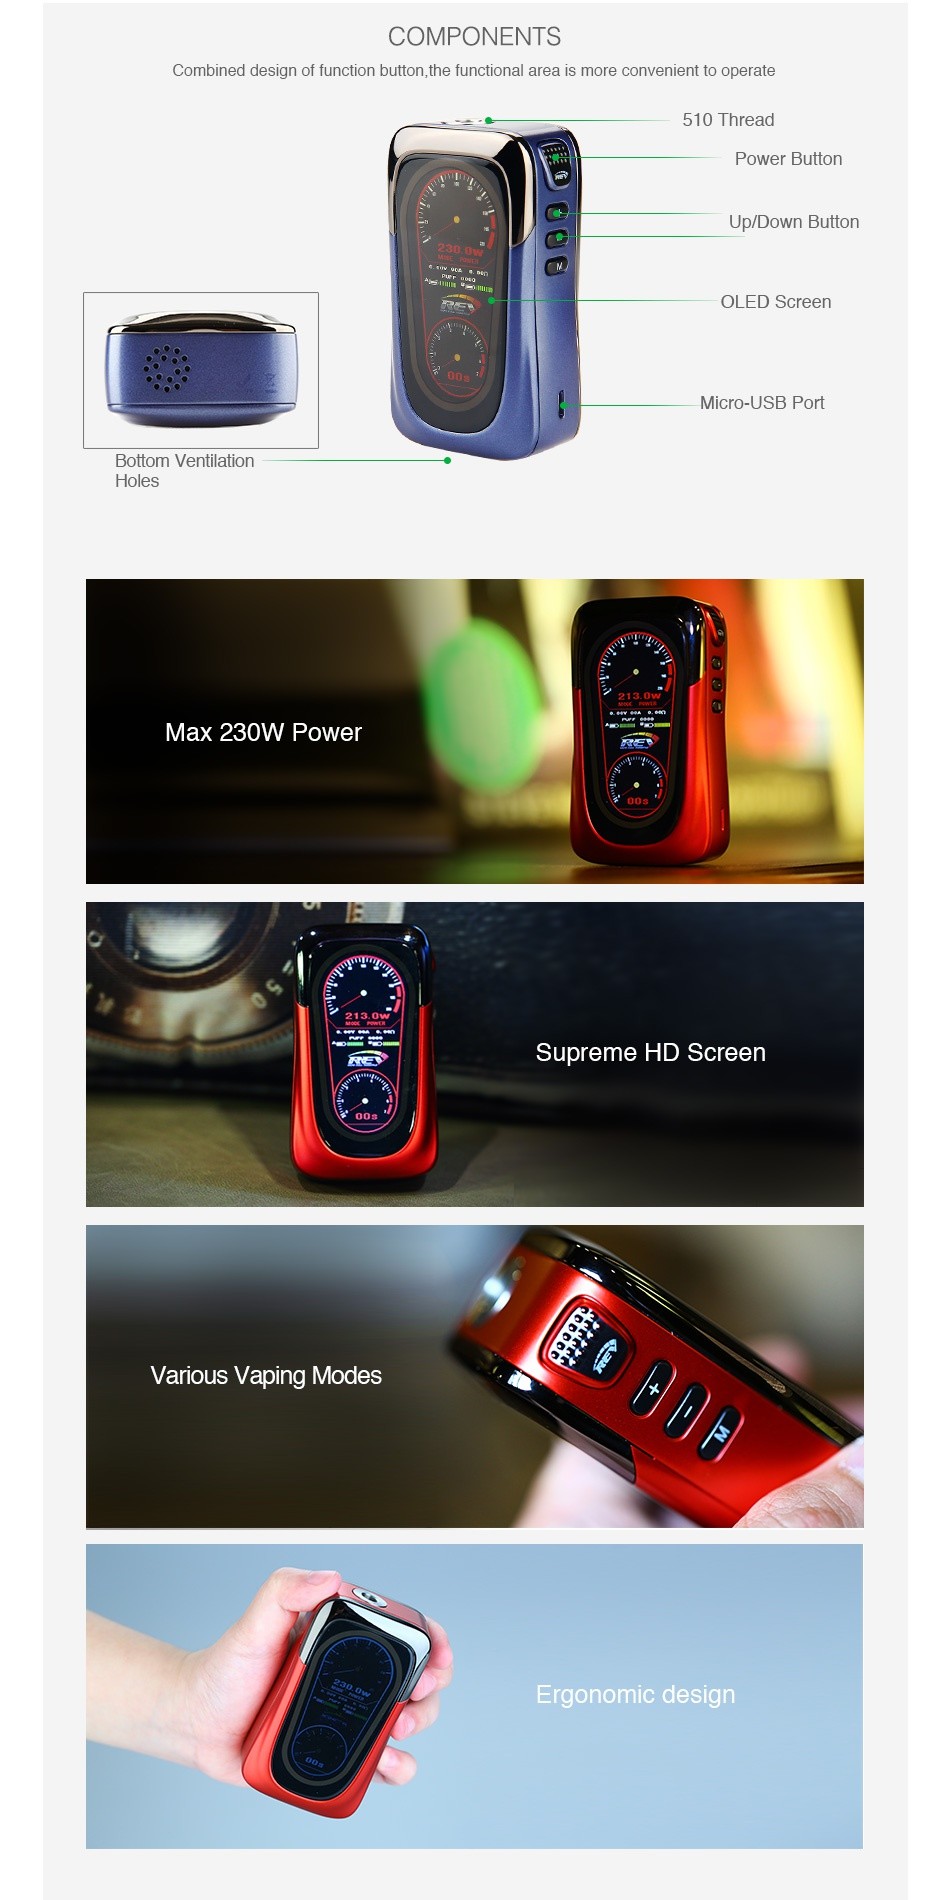 REV GTS 230W TC Box MOD COMPONENTS Combined design of function button  the functional area is more convenient to operate 510 Thread Power Button Up Down Button OLED Screen Micro USB Port Bottom ventilation Holes Max 230W Power Supreme HD Screen Various vaping Modes Ergonomic desian